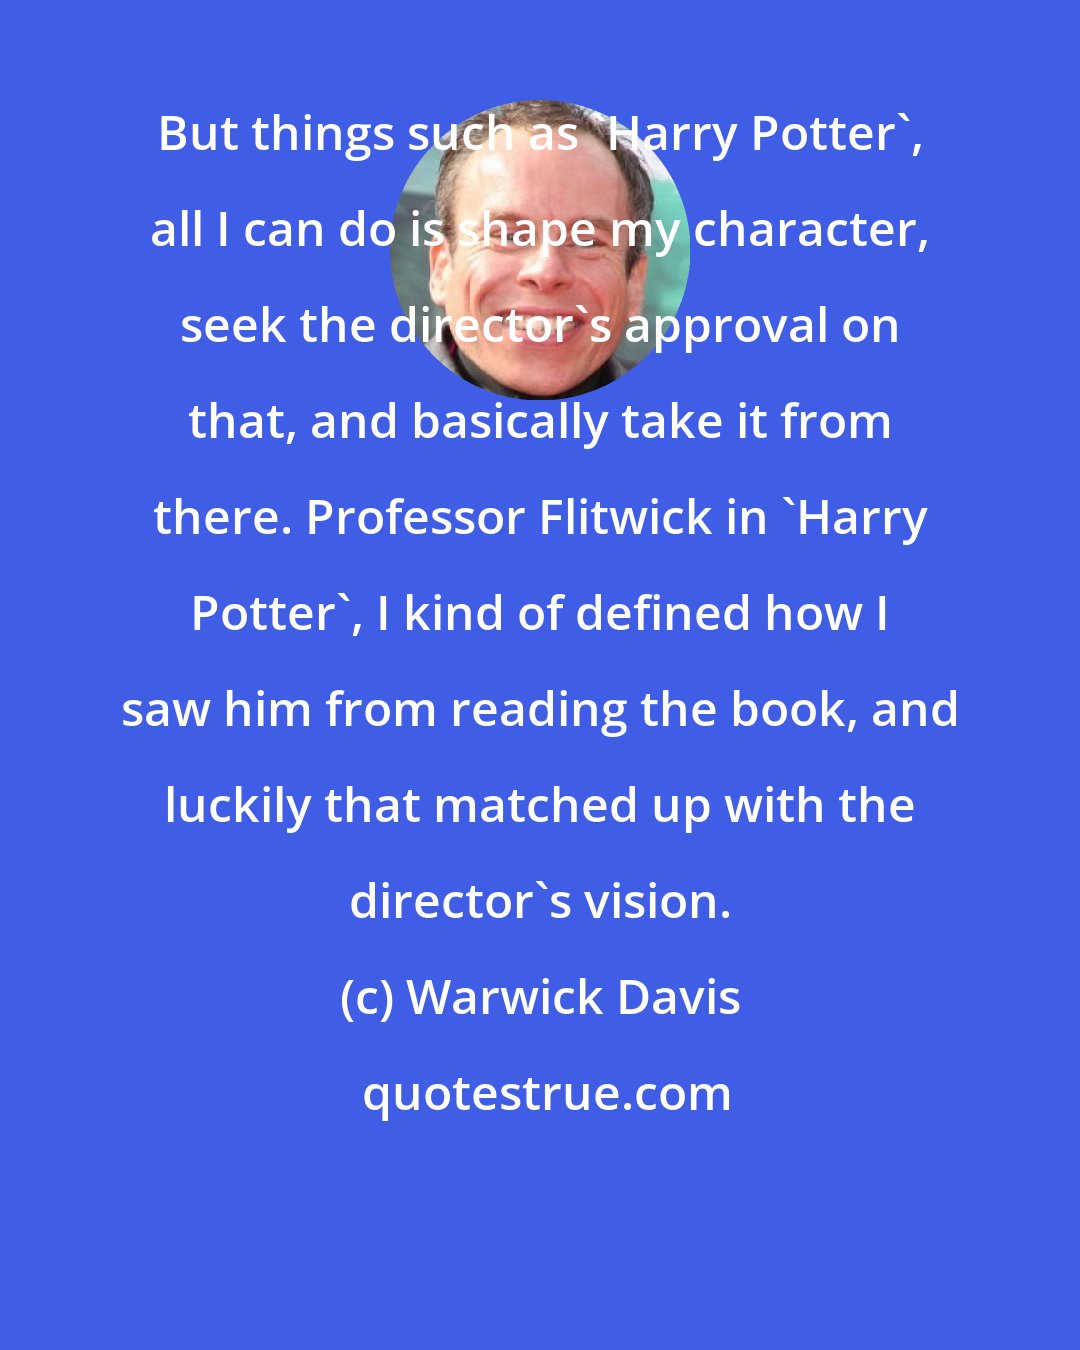 Warwick Davis: But things such as 'Harry Potter', all I can do is shape my character, seek the director's approval on that, and basically take it from there. Professor Flitwick in 'Harry Potter', I kind of defined how I saw him from reading the book, and luckily that matched up with the director's vision.